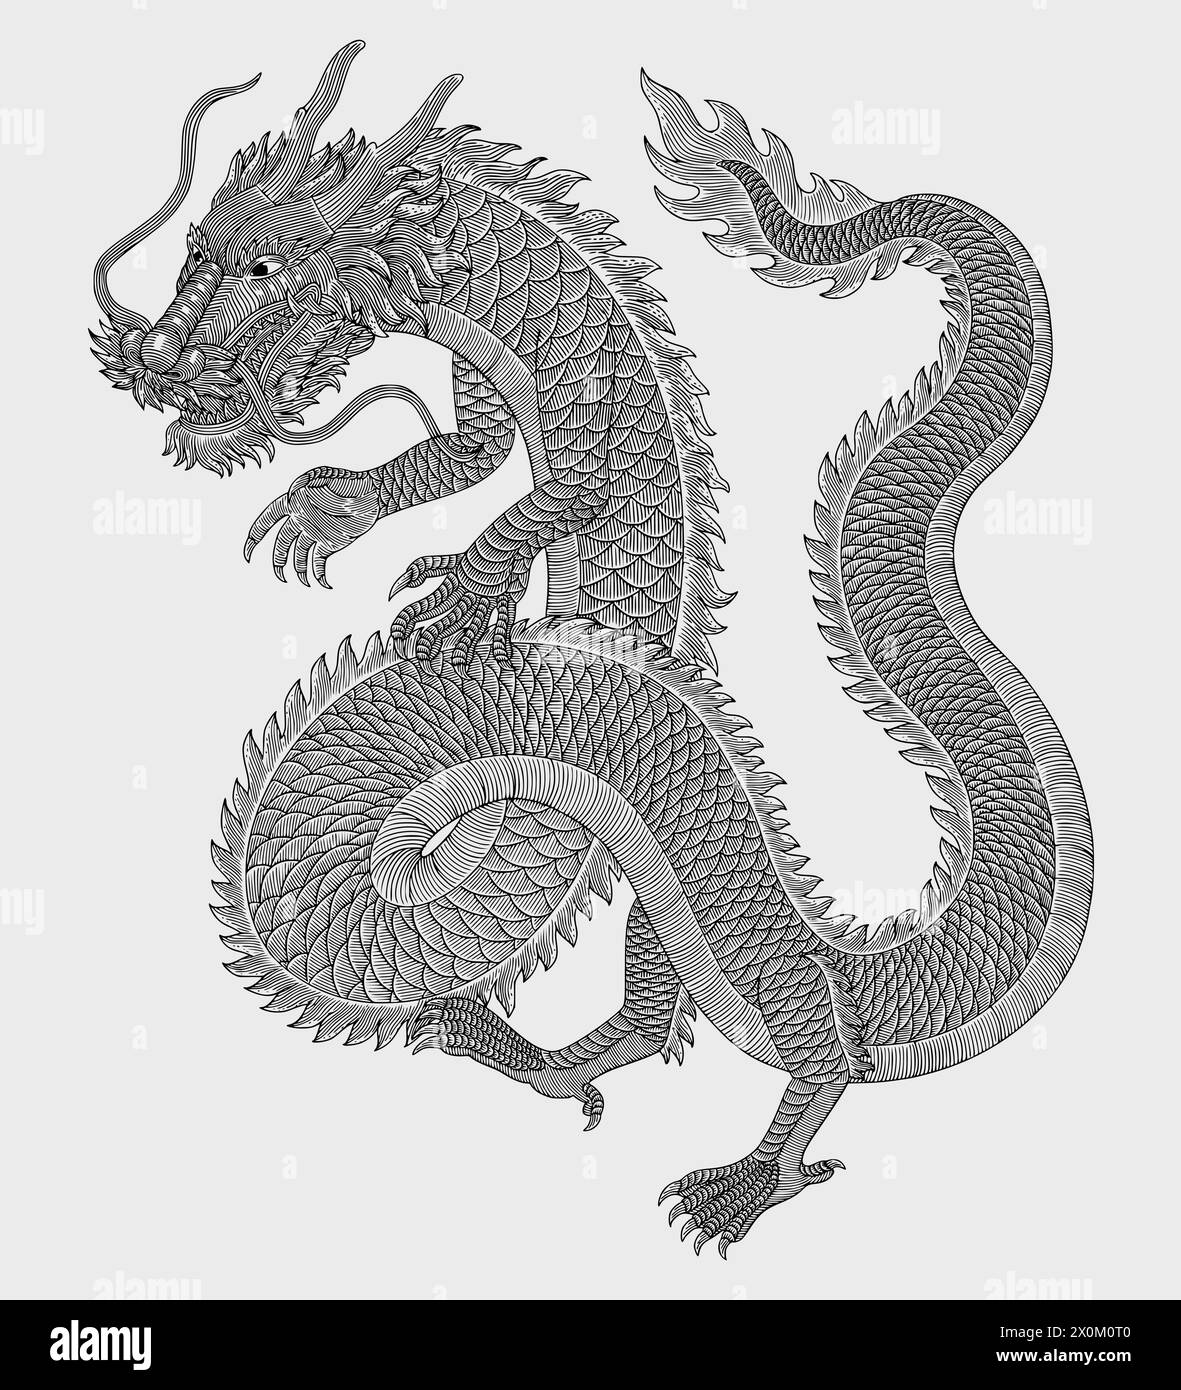 Japanese dragon vector vintage engraving drawing style illustration Stock Vector